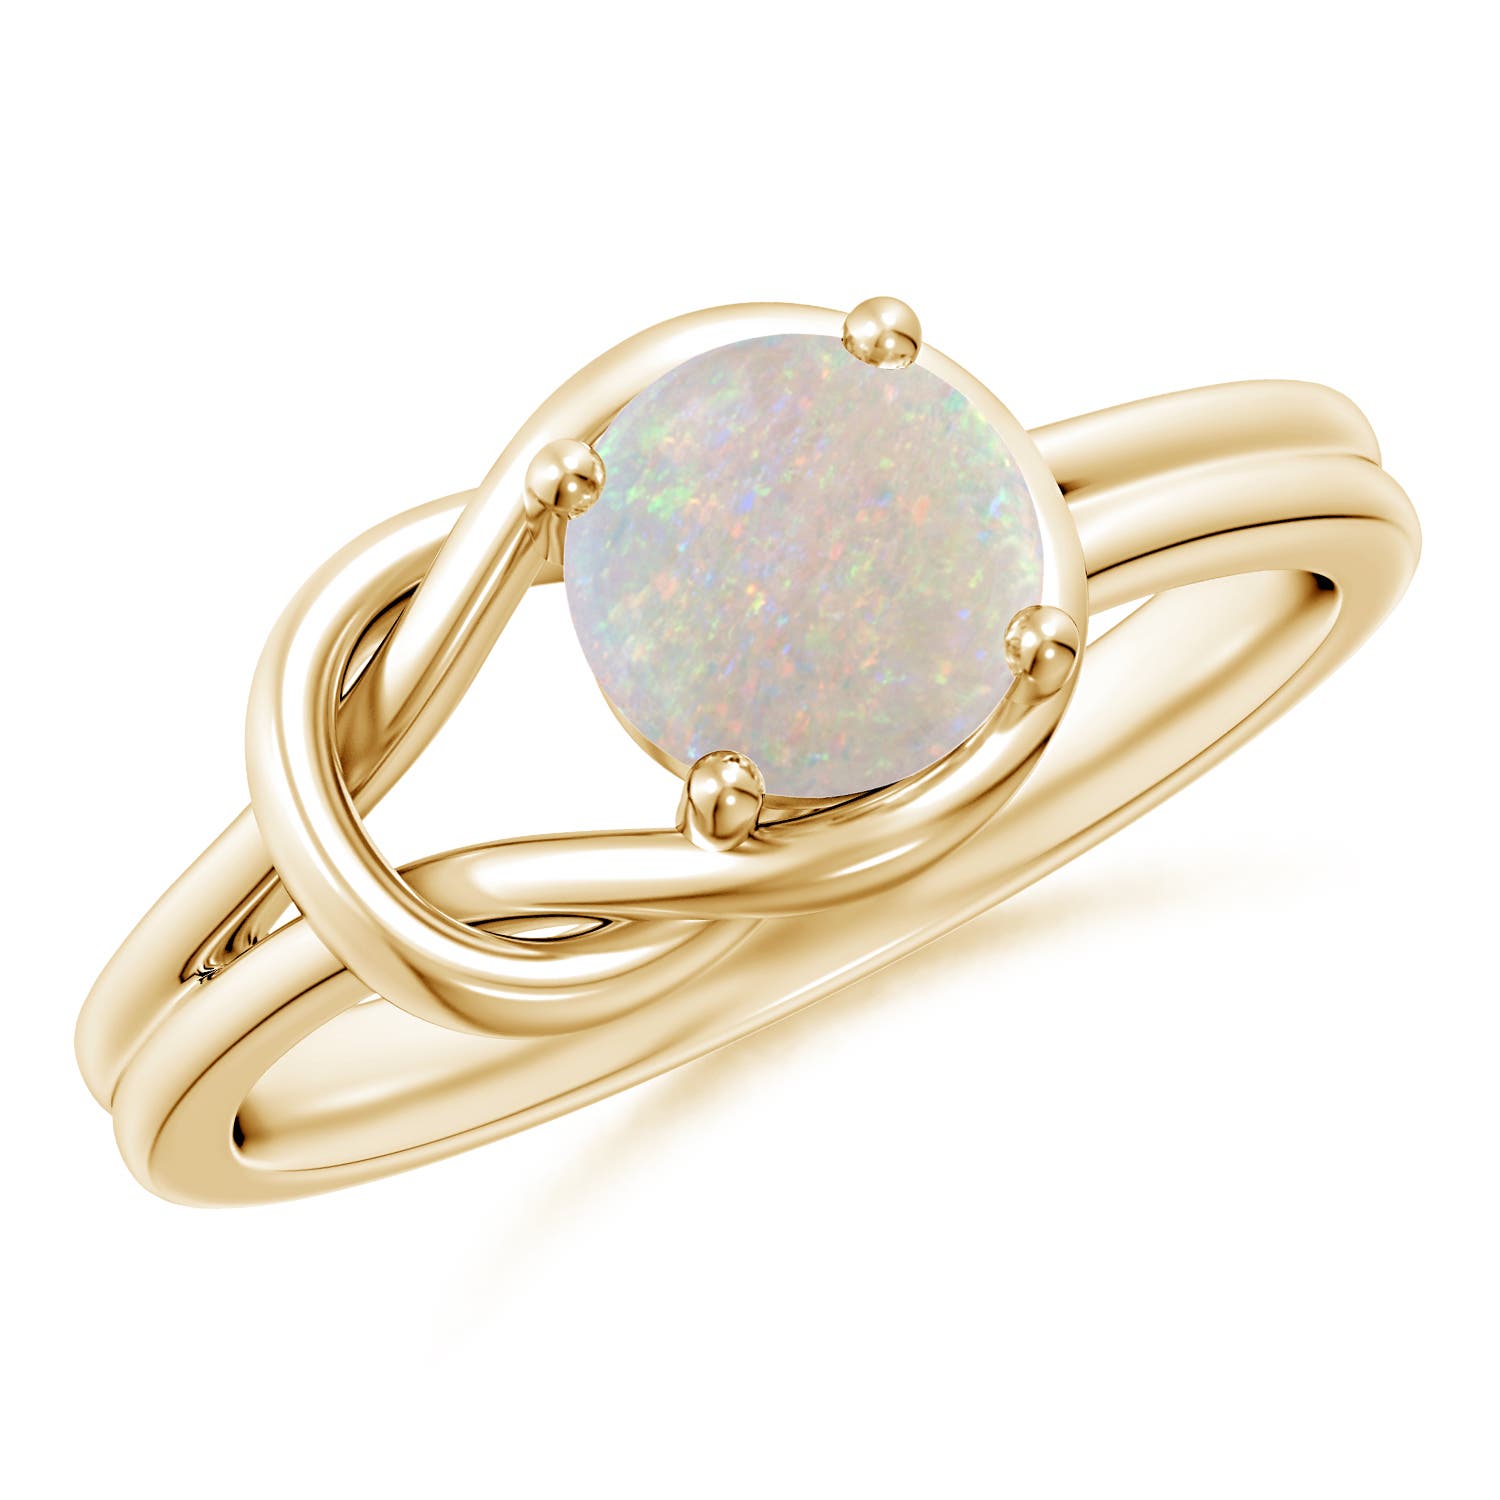 AA - Opal / 0.5 CT / 14 KT Yellow Gold